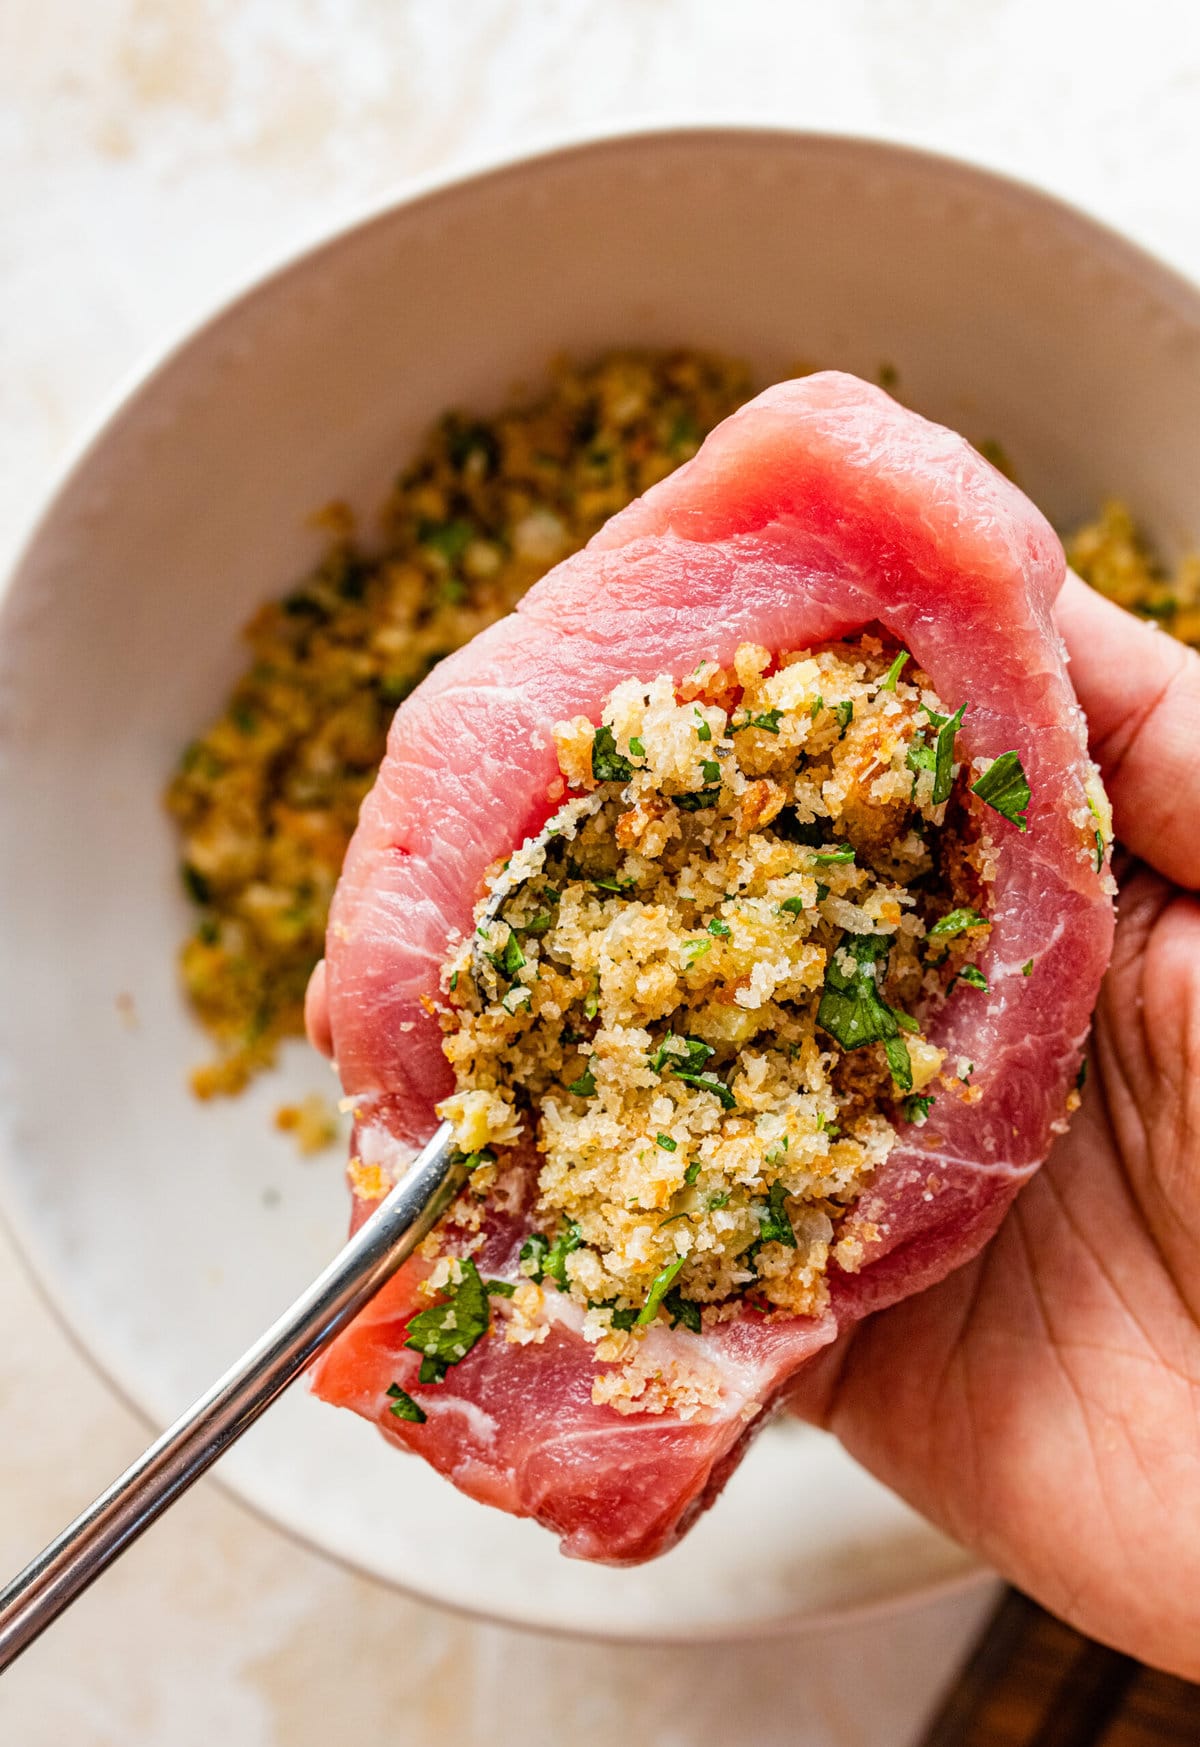 how to make Oven Baked Stuffed Pork Chops Recipe: filling the pork chop with the stuffing.